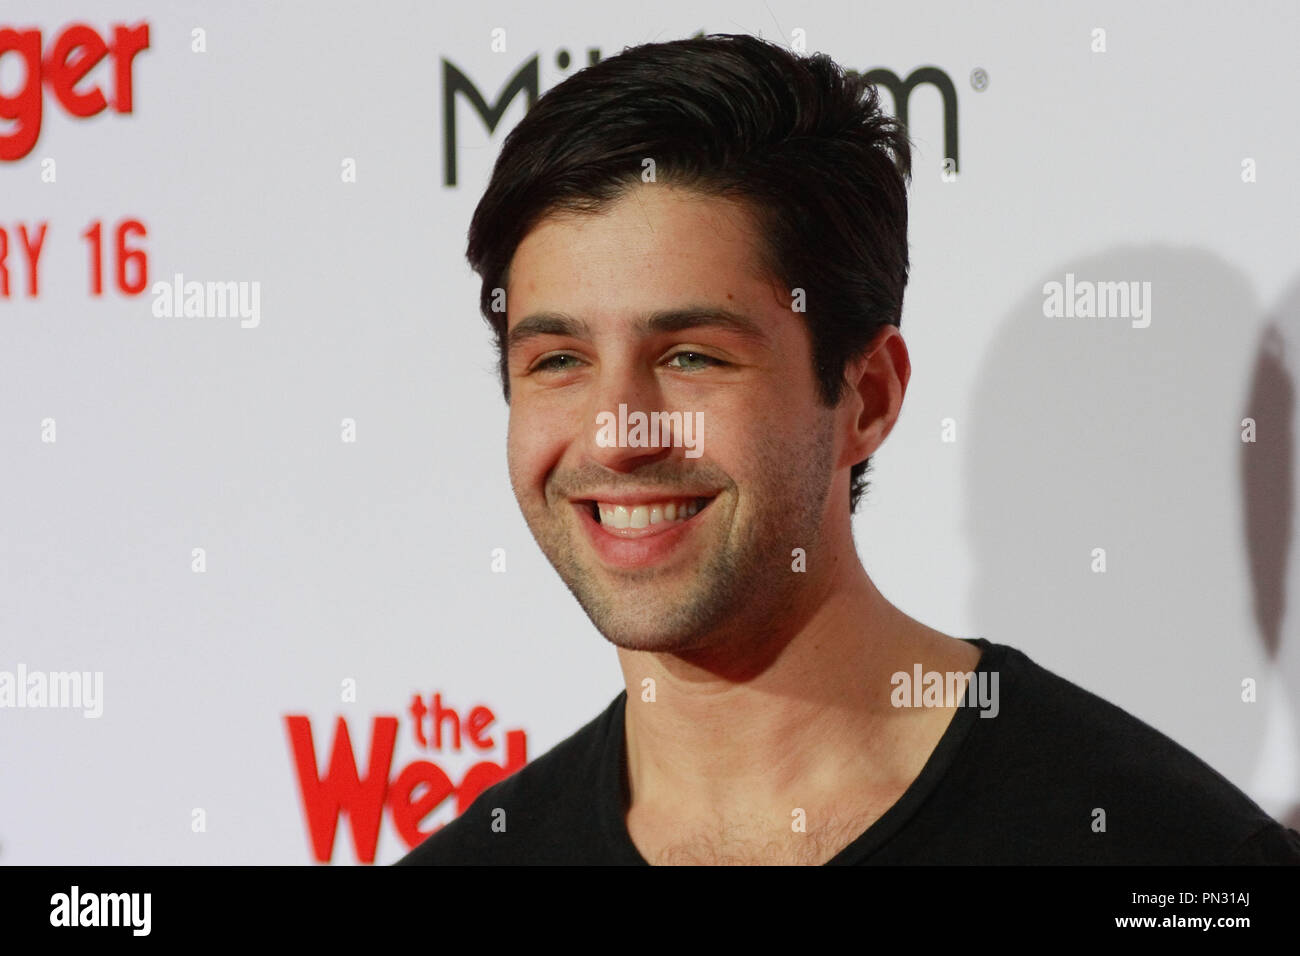 Josh Peck at the Premiere of Screen Gems' "The Wedding Ringer" held at the  TCL Chinese Theater in Hollywood, CA, January 16, 2015. Photo by Joe  Martinez / PictureLux Stock Photo - Alamy